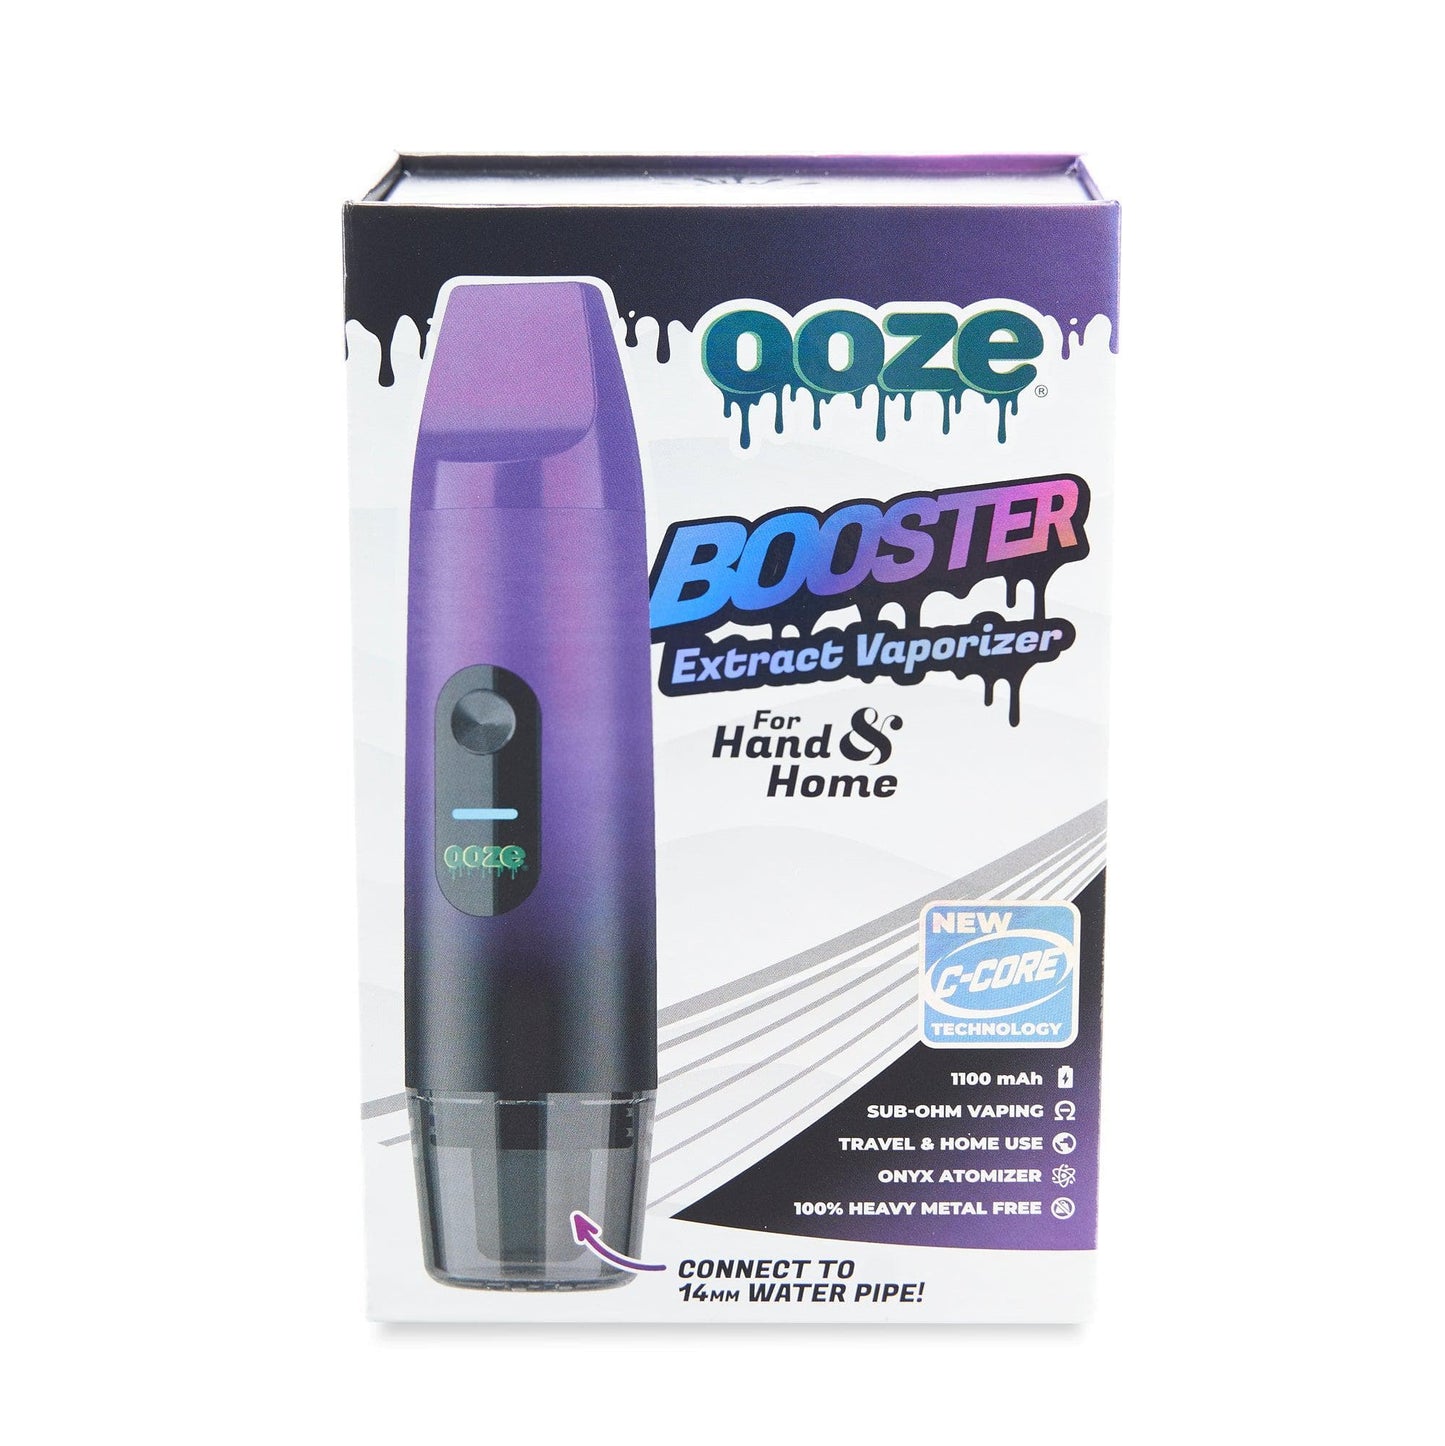 Ooze Batteries and Vapes Ooze Booster Extract Vaporizer – C-Core 1100 mAh